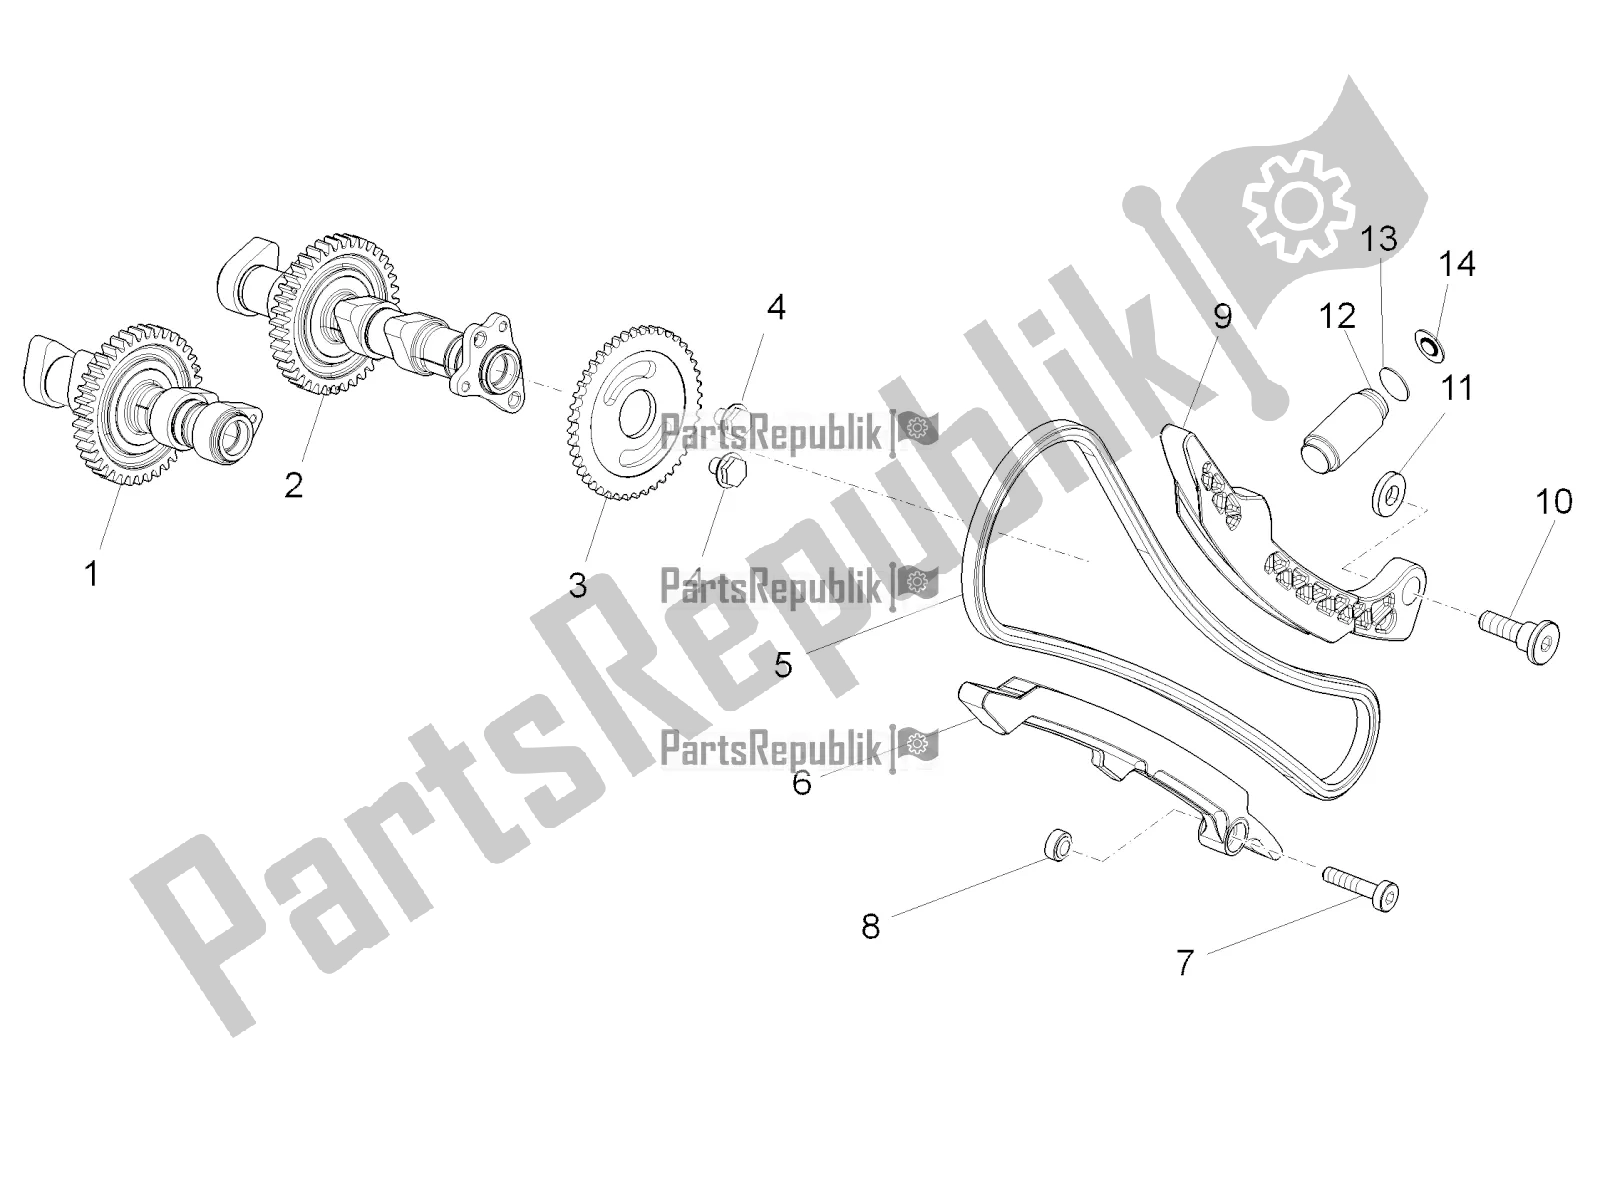 All parts for the Front Cylinder Timing System of the Aprilia Tuono V4 1100 RR USA 2020